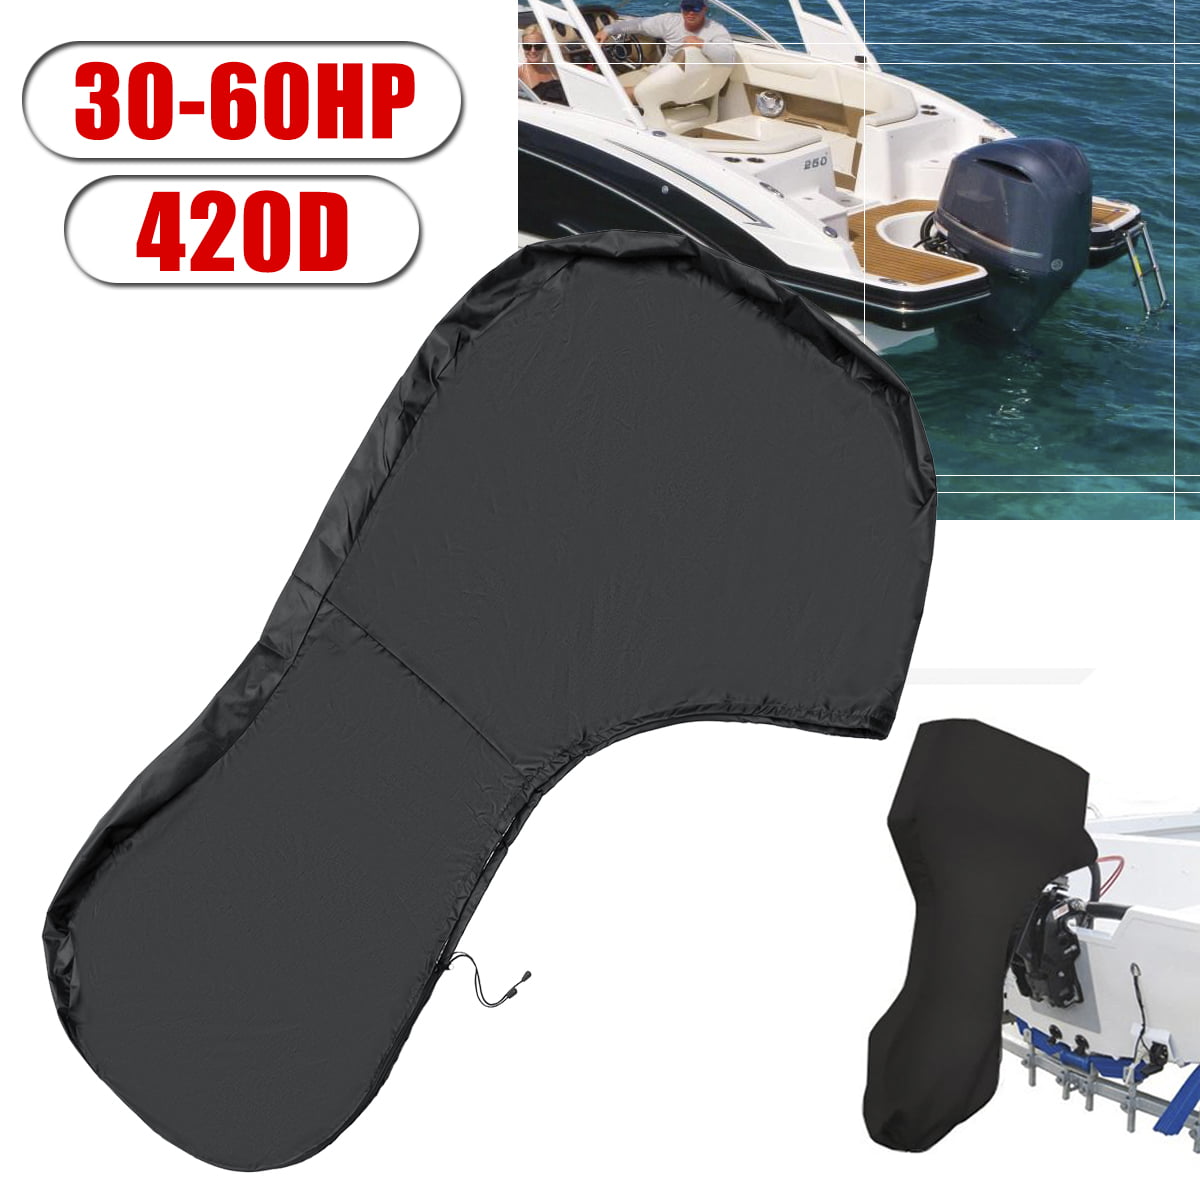 and UV Resistant with Thick Polyester Fabric Mildew Resistant 25-50HP, 50-115 HP,115-225 HP Coco Outboard Motor Cover Waterproof Boat Motor Cover up to